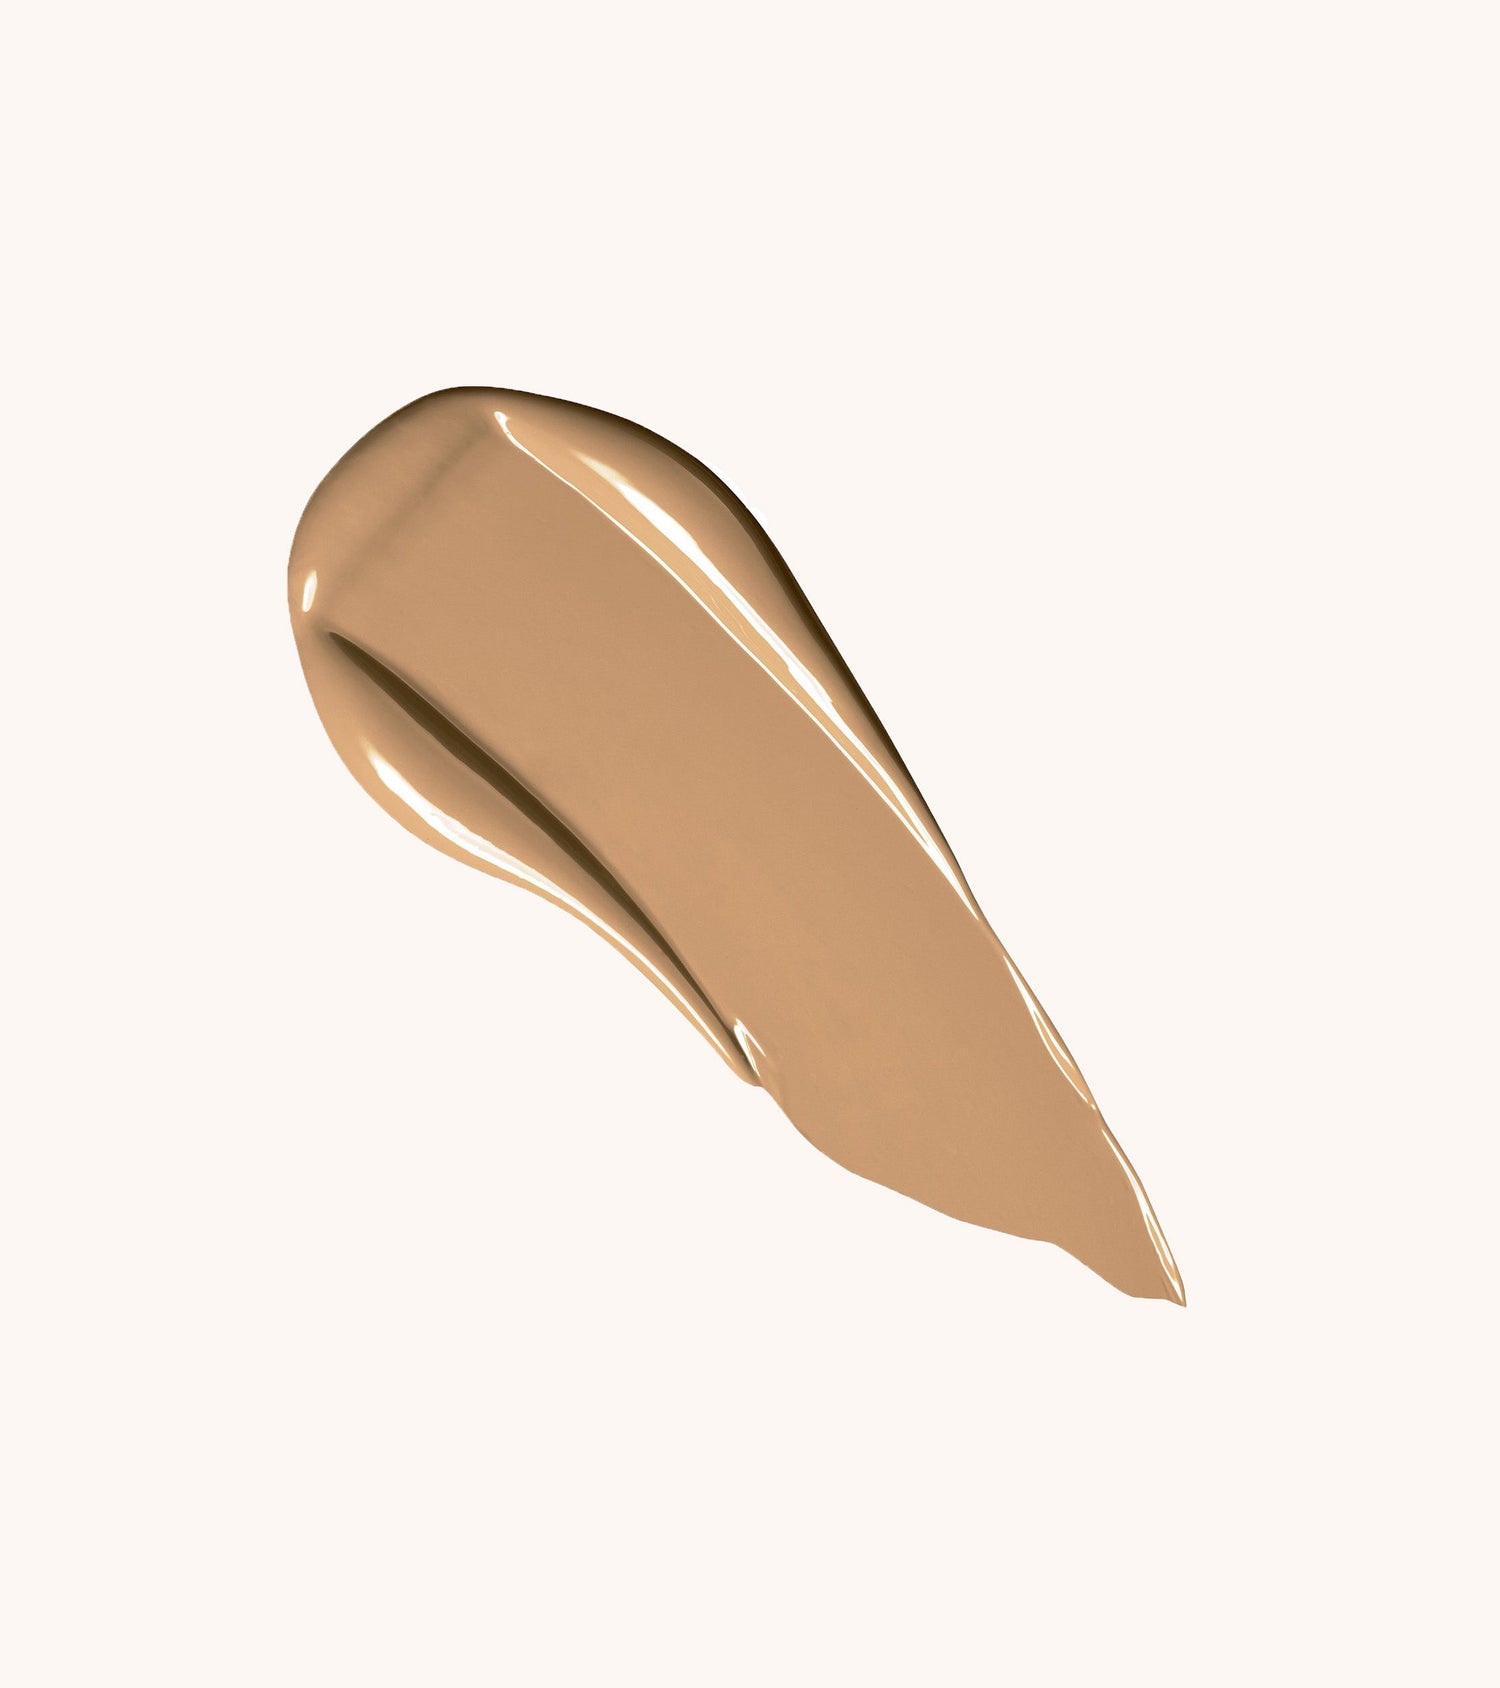 Authentik Skin Perfector Concealer (130 For Real) Main Image featured